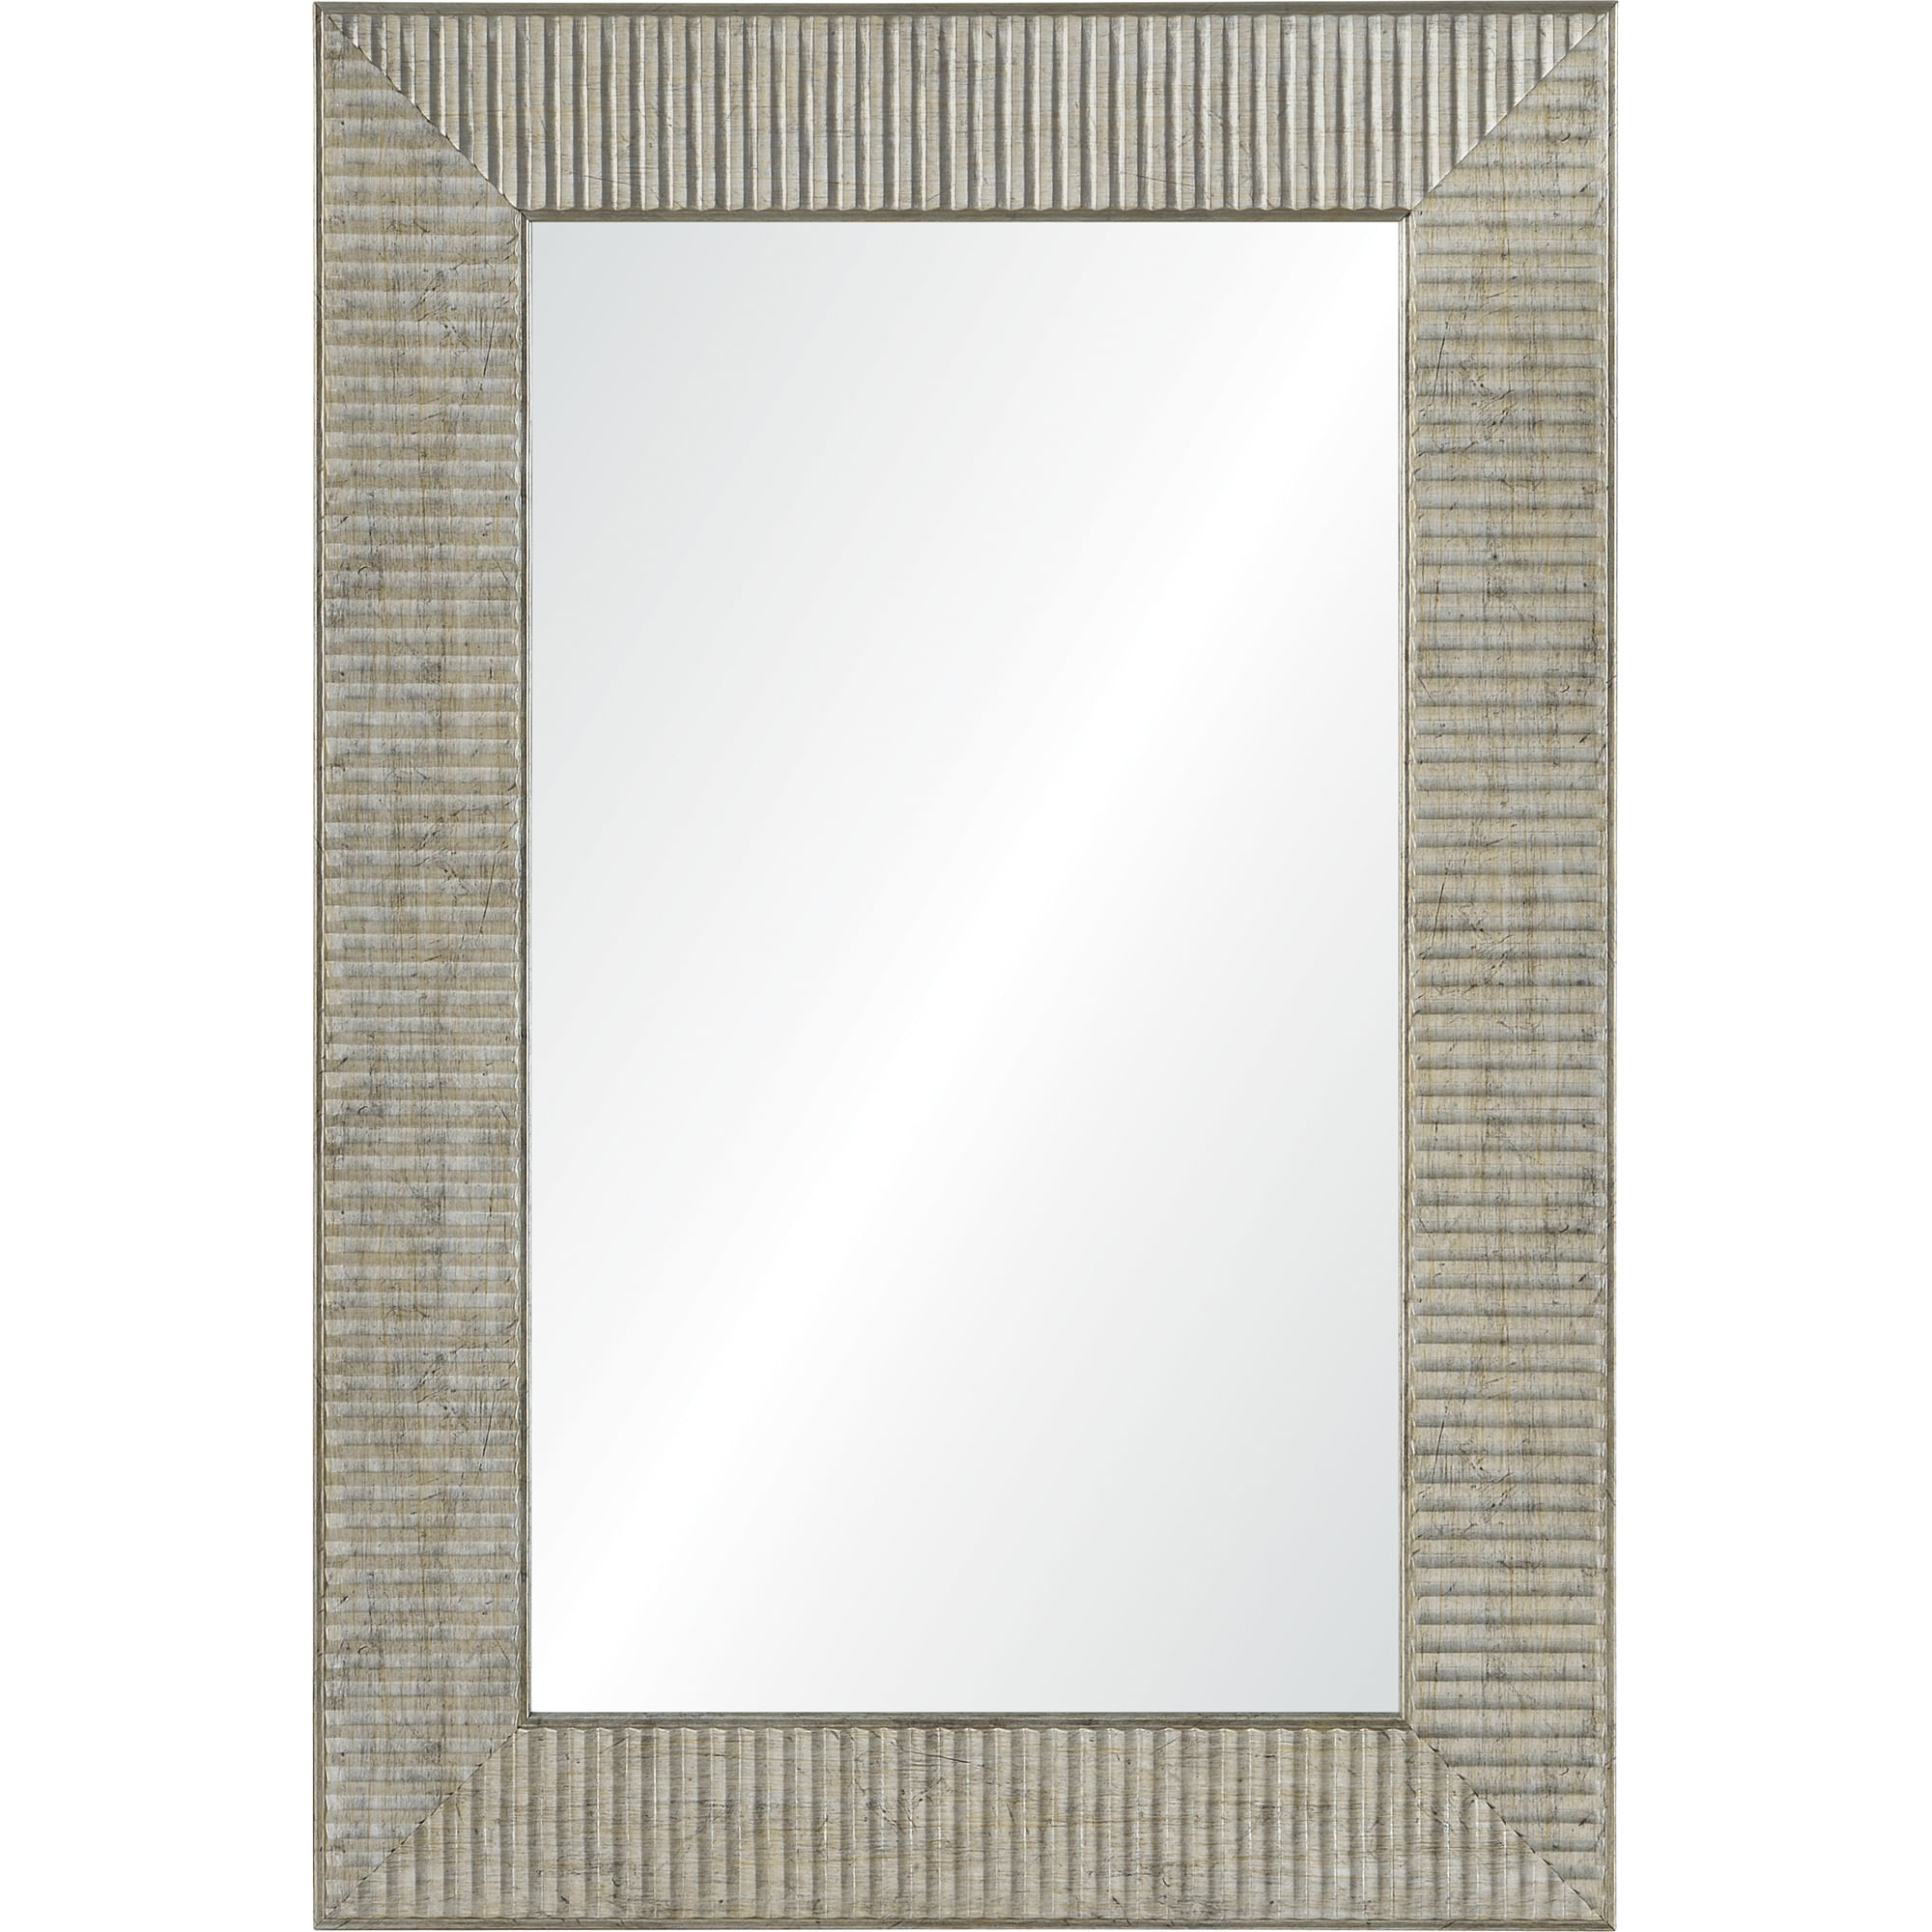 Renwil Home Accents Roslyn Mirror 9787 - Decor Interiors - Chesterfield, MO